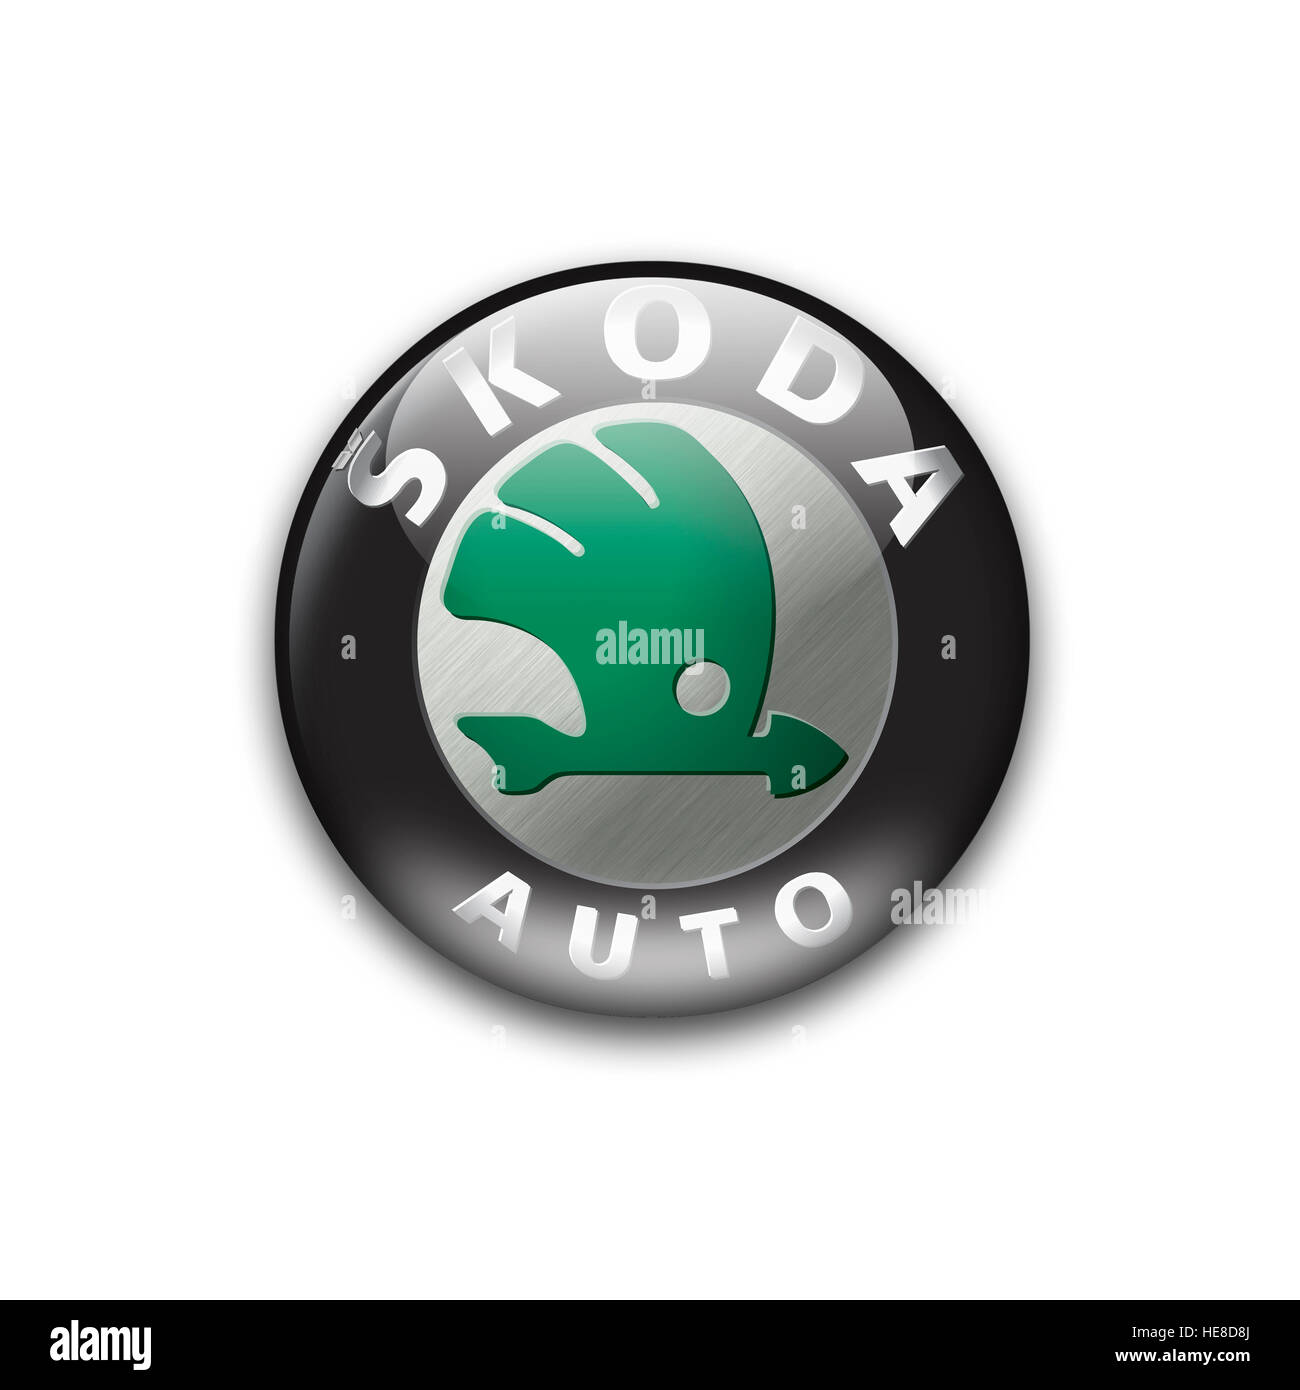 Skoda emblem Cut Out Stock Images & Pictures - Alamy